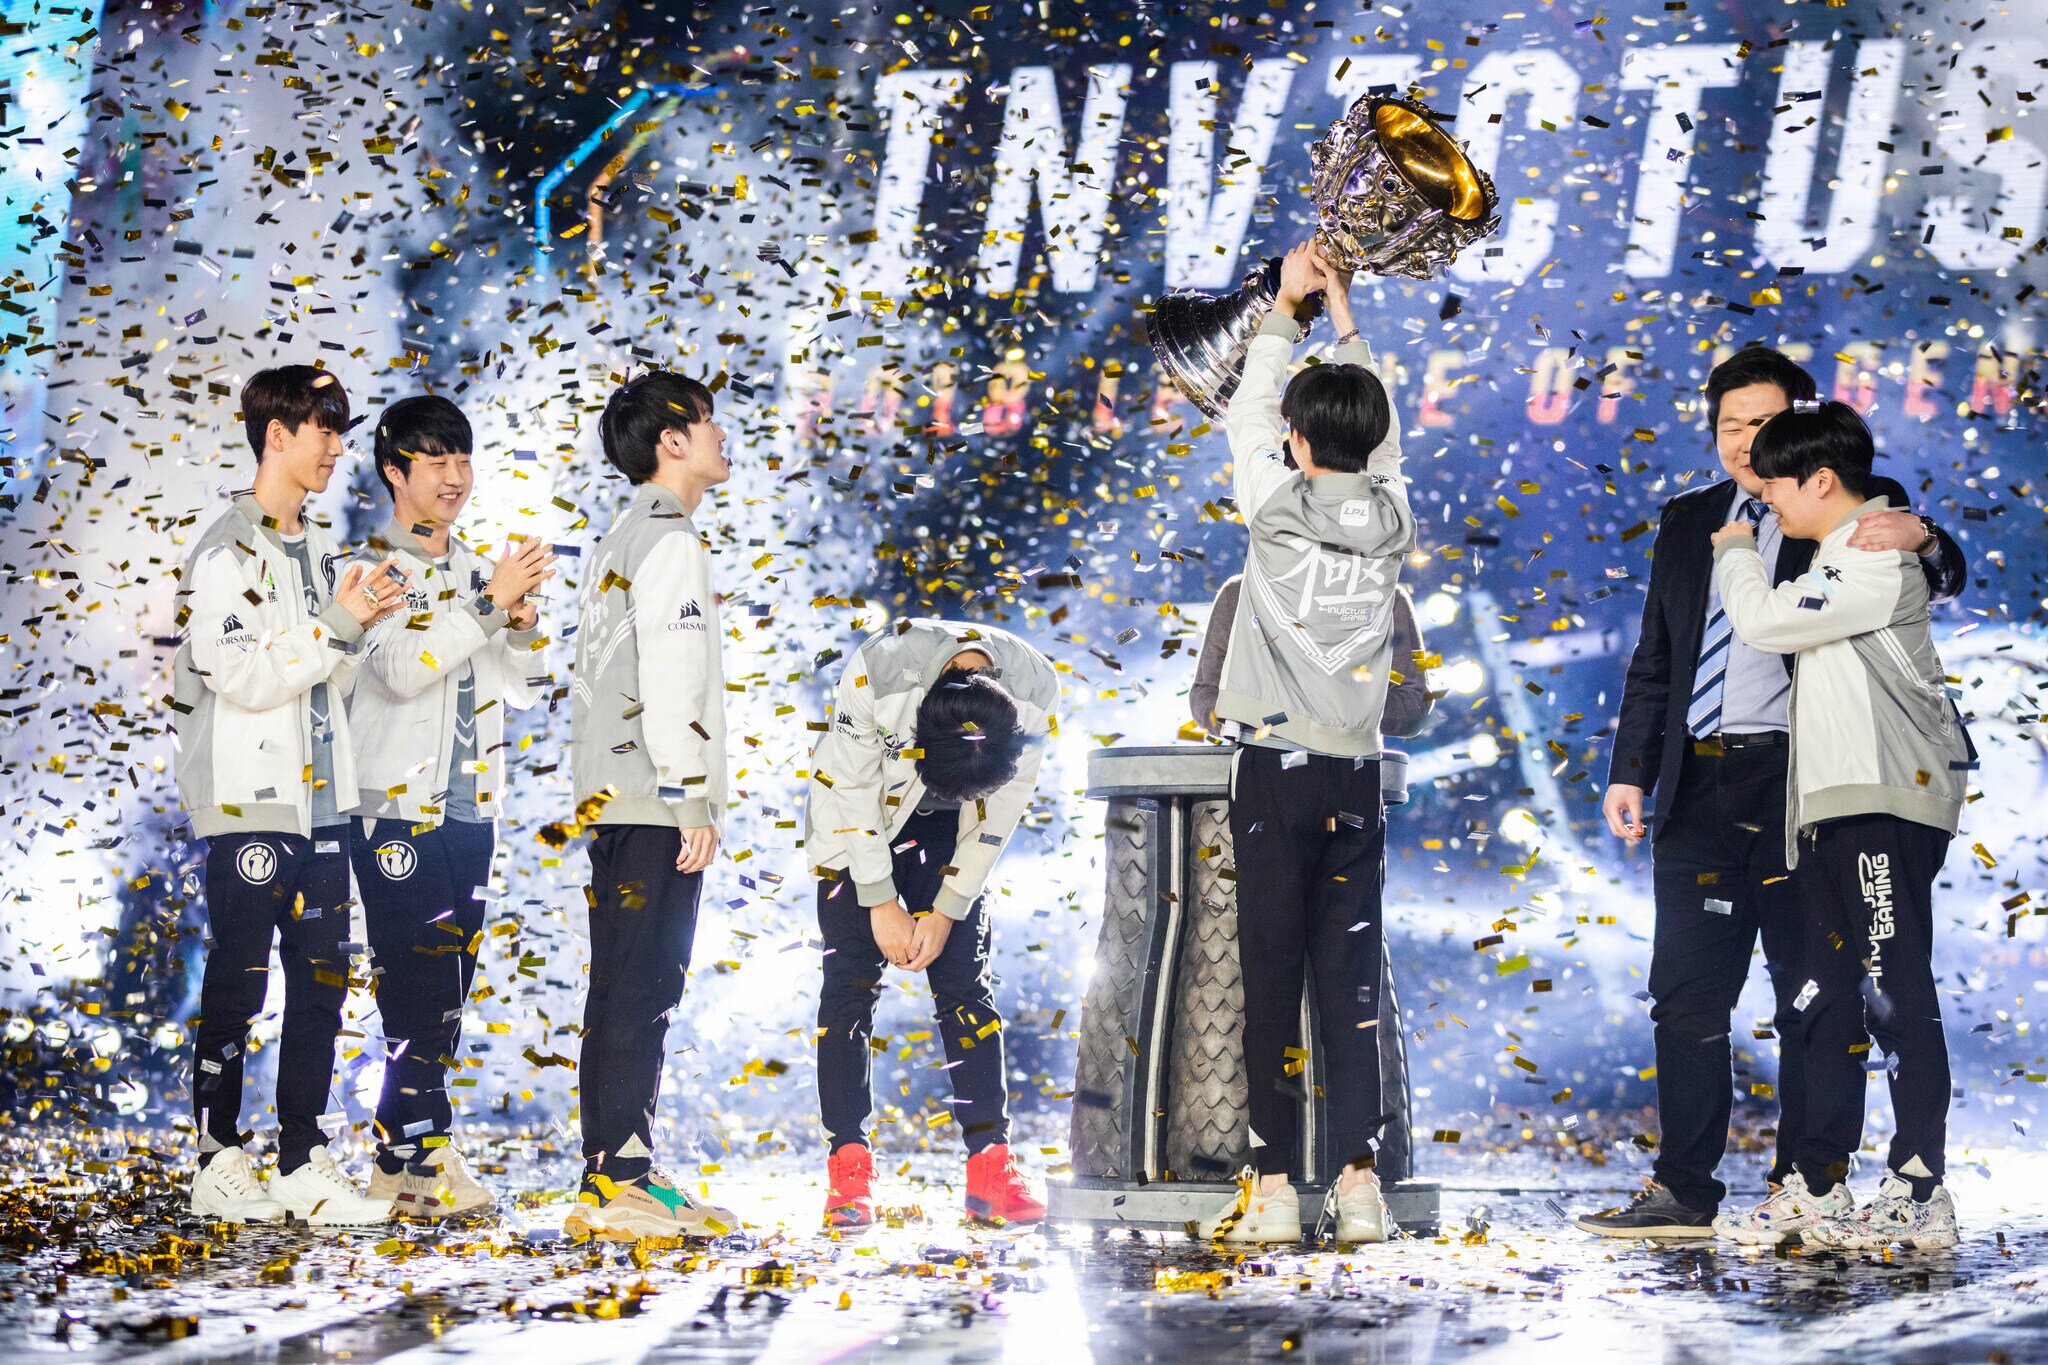 Invictus Gaming became the first LPL team to win the League of Legends World Championships.